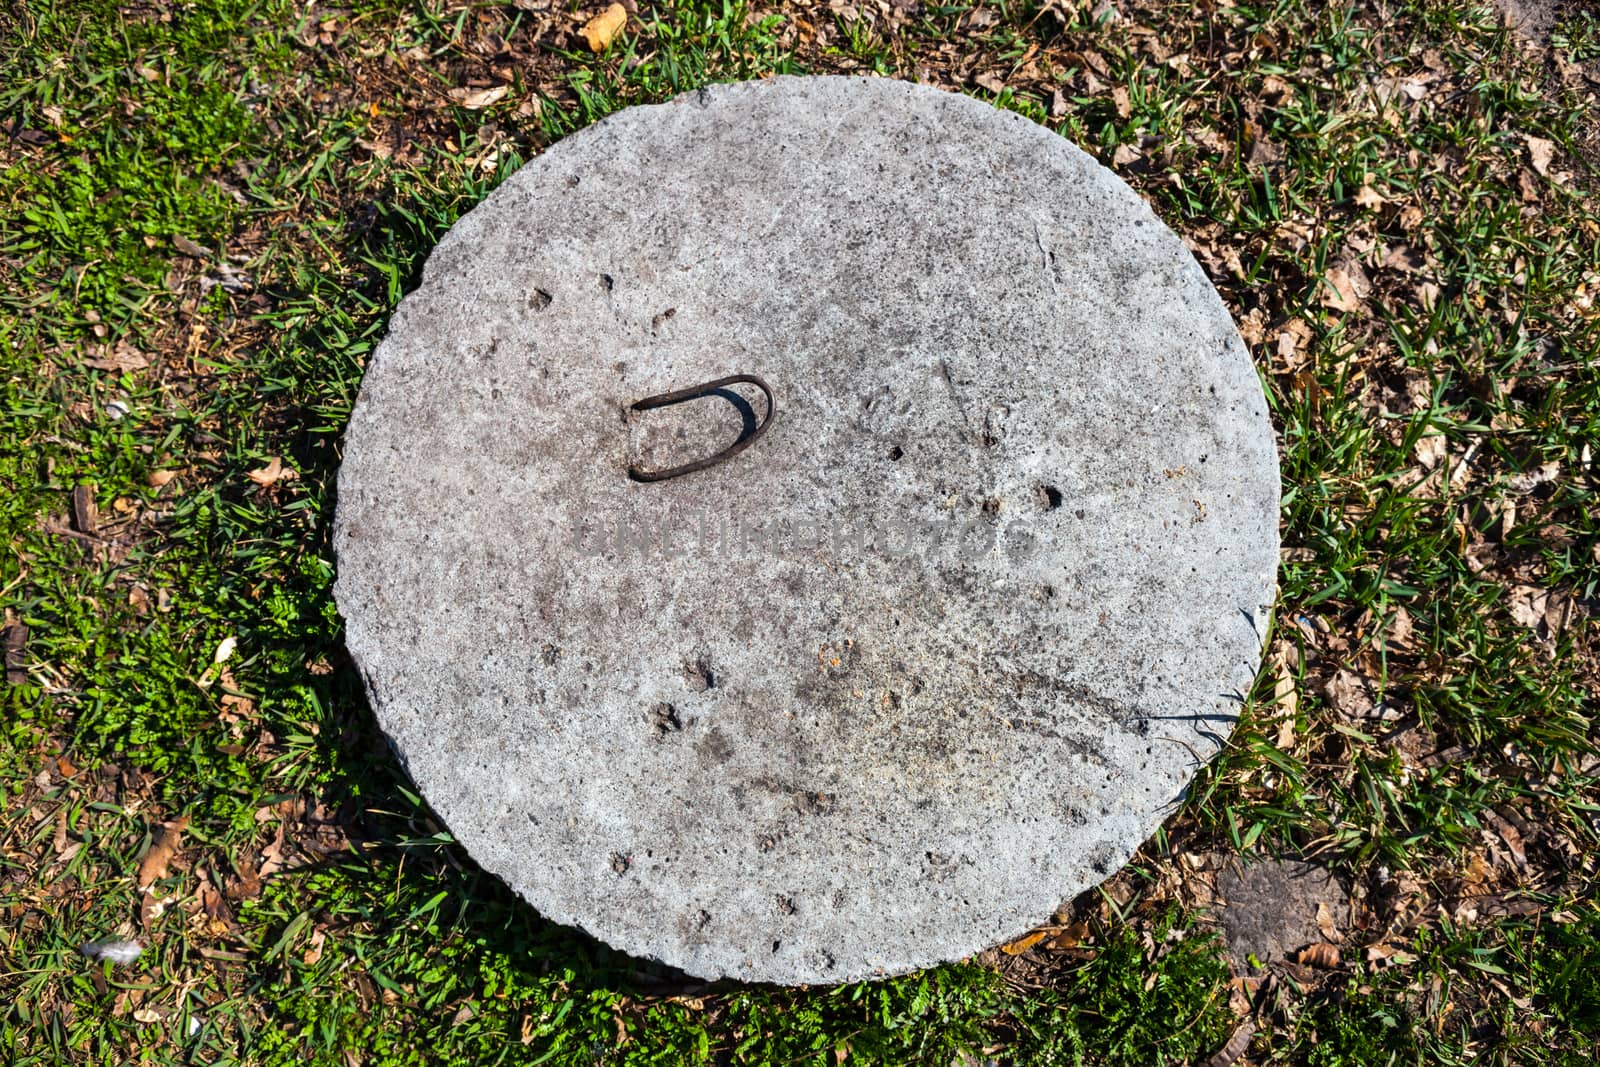 Concrete manhole cover in the grass in the sunny day.